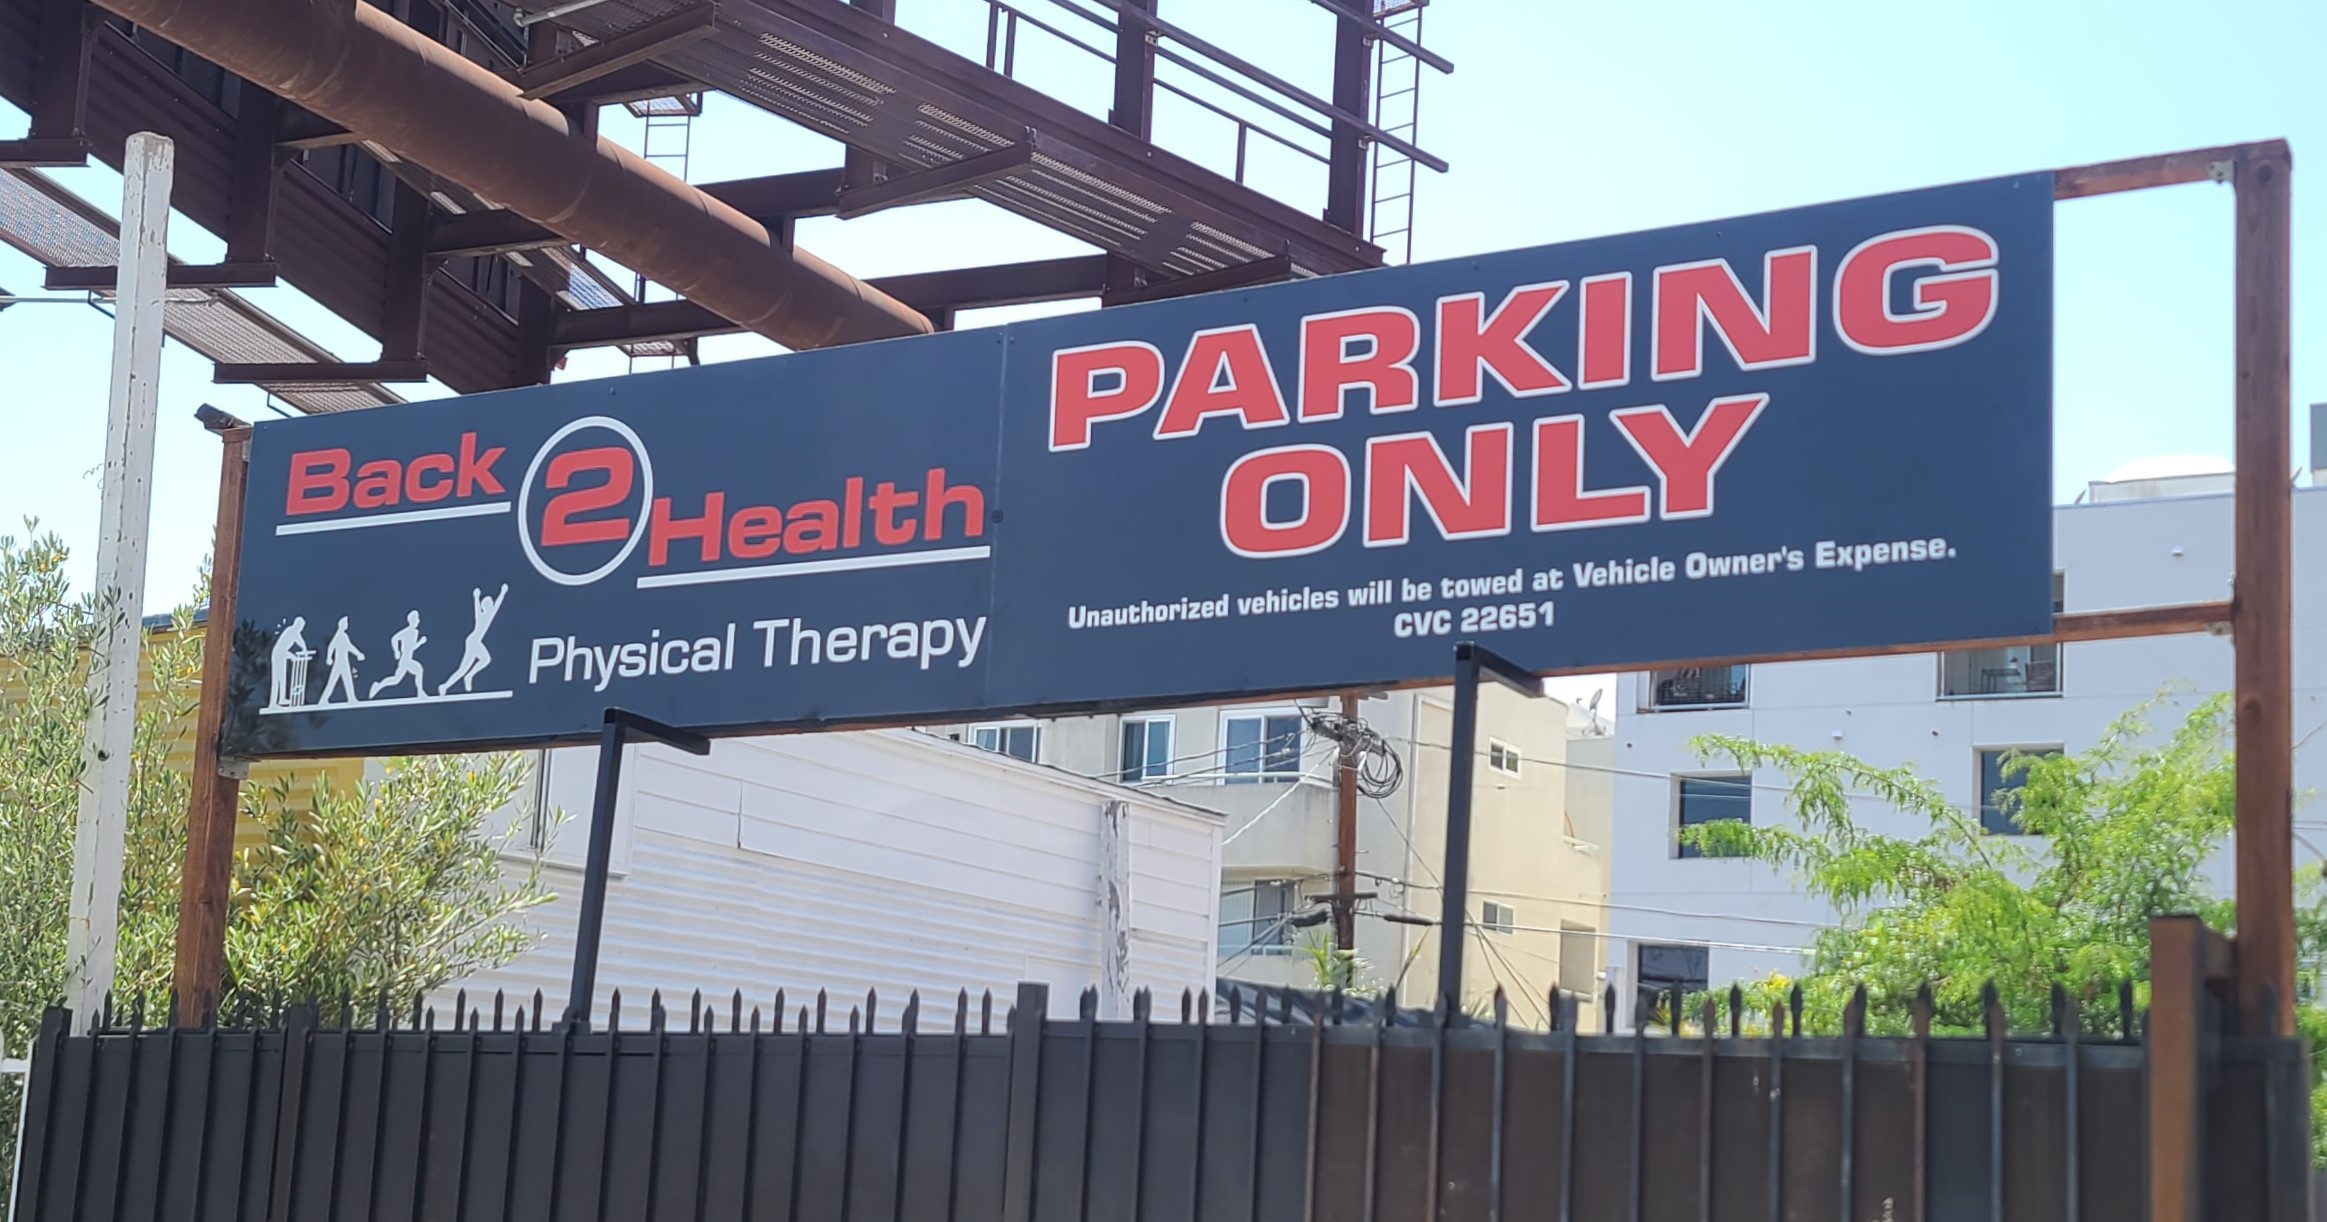 Our MaxMetal parking lot sign for Back 2 Health Physical Therapy in Los Angeles. Finding parking space an easier process for the facility's patients.